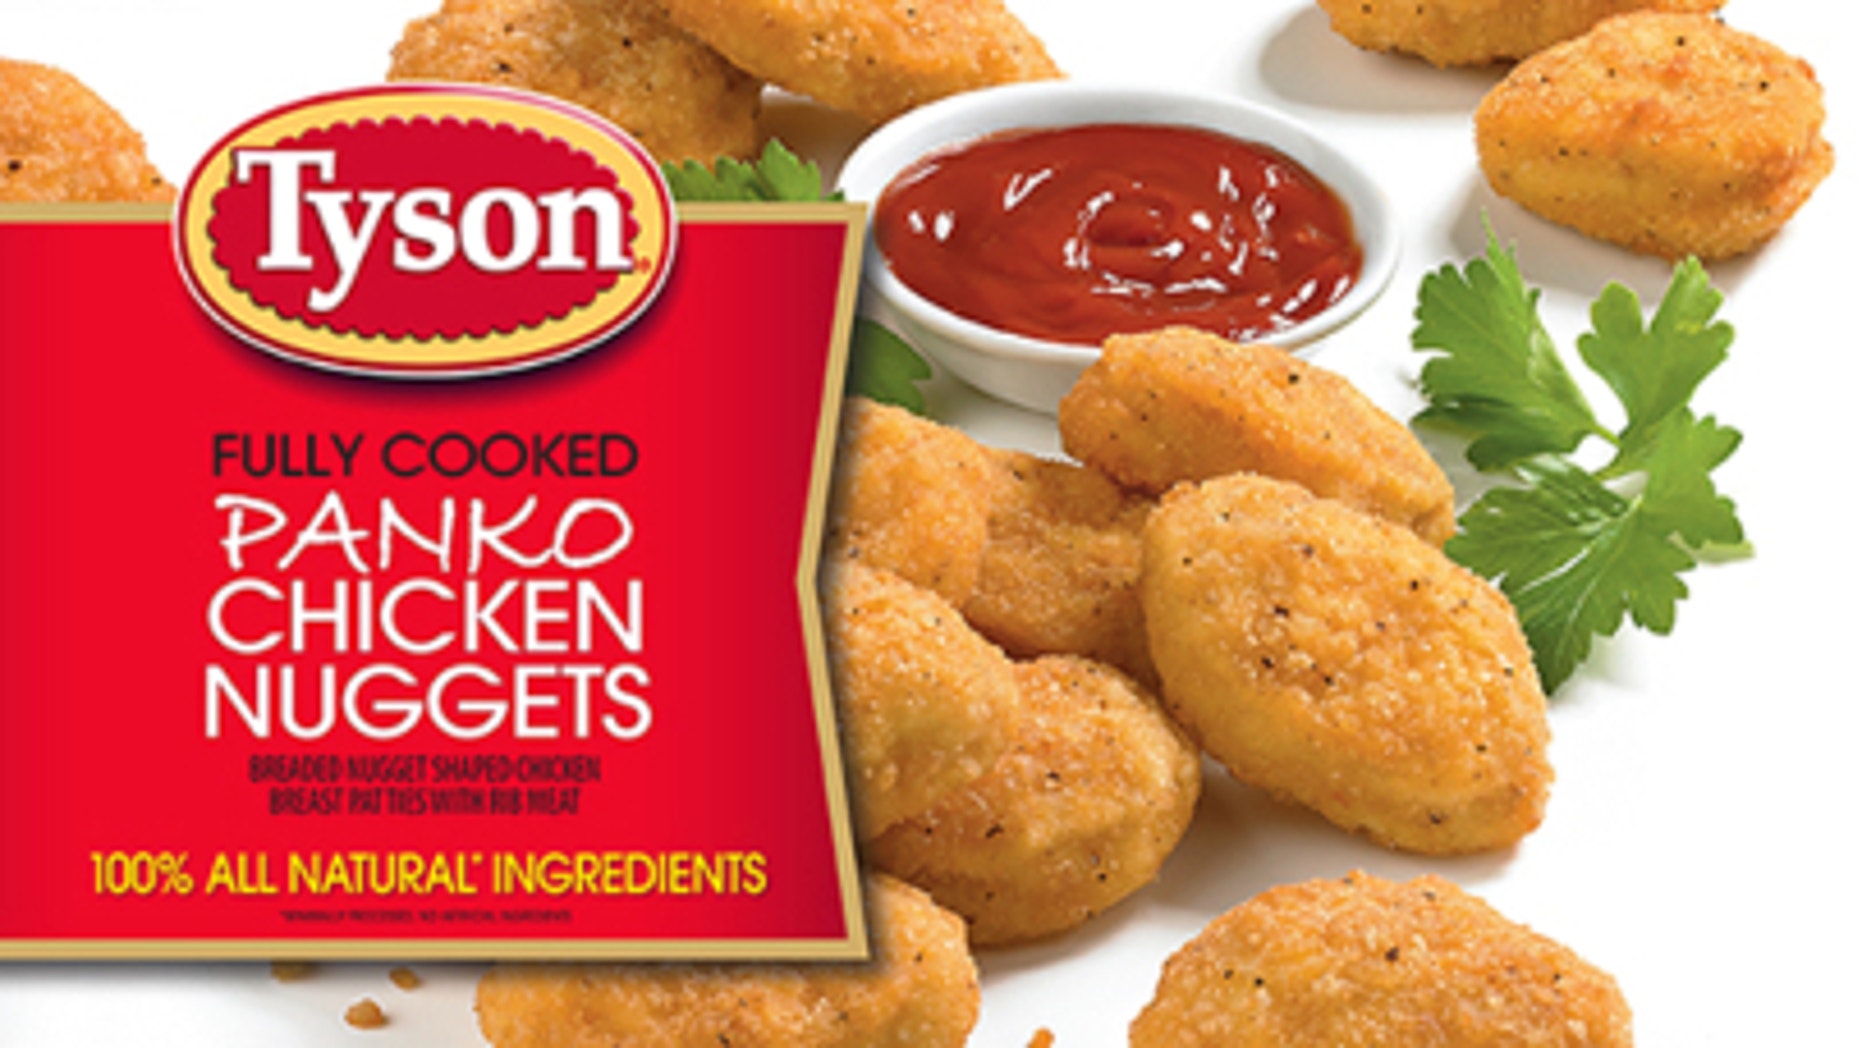 Reports of plastic prompt recall of Tyson chicken nuggets Fox News